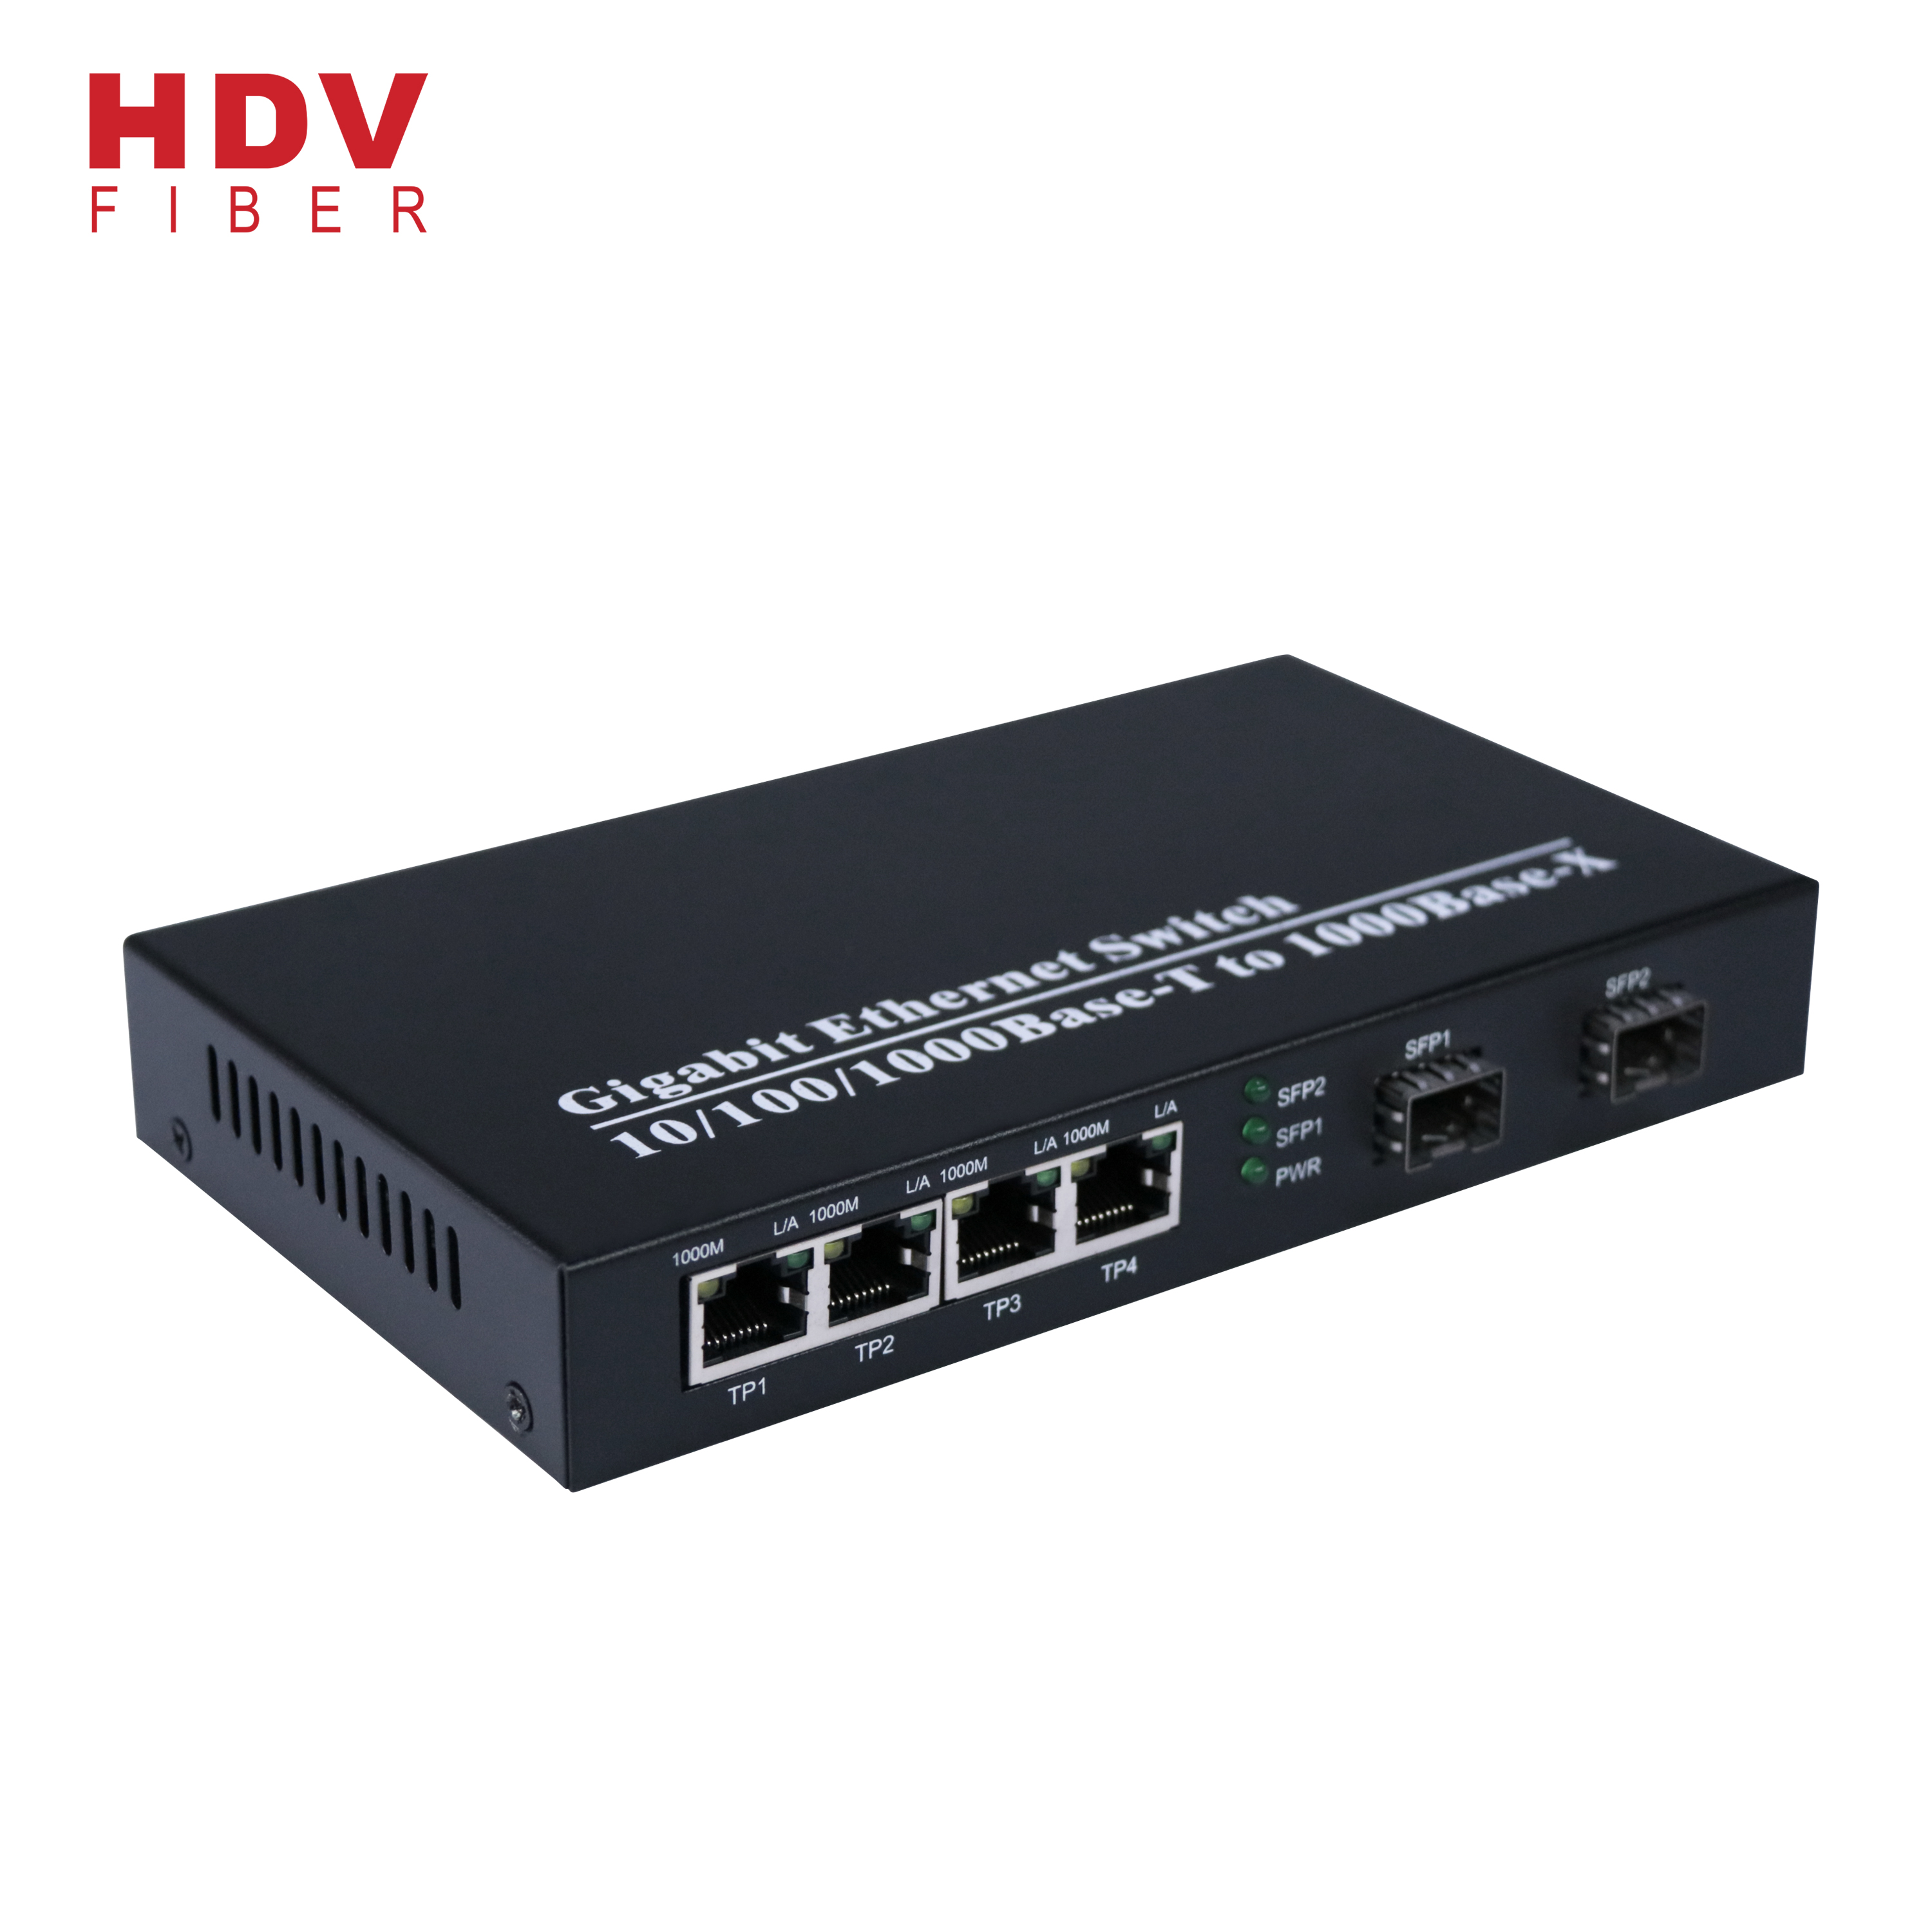 4-Port SFP Fiber Optic Switch: Accelerate Your Connectivity